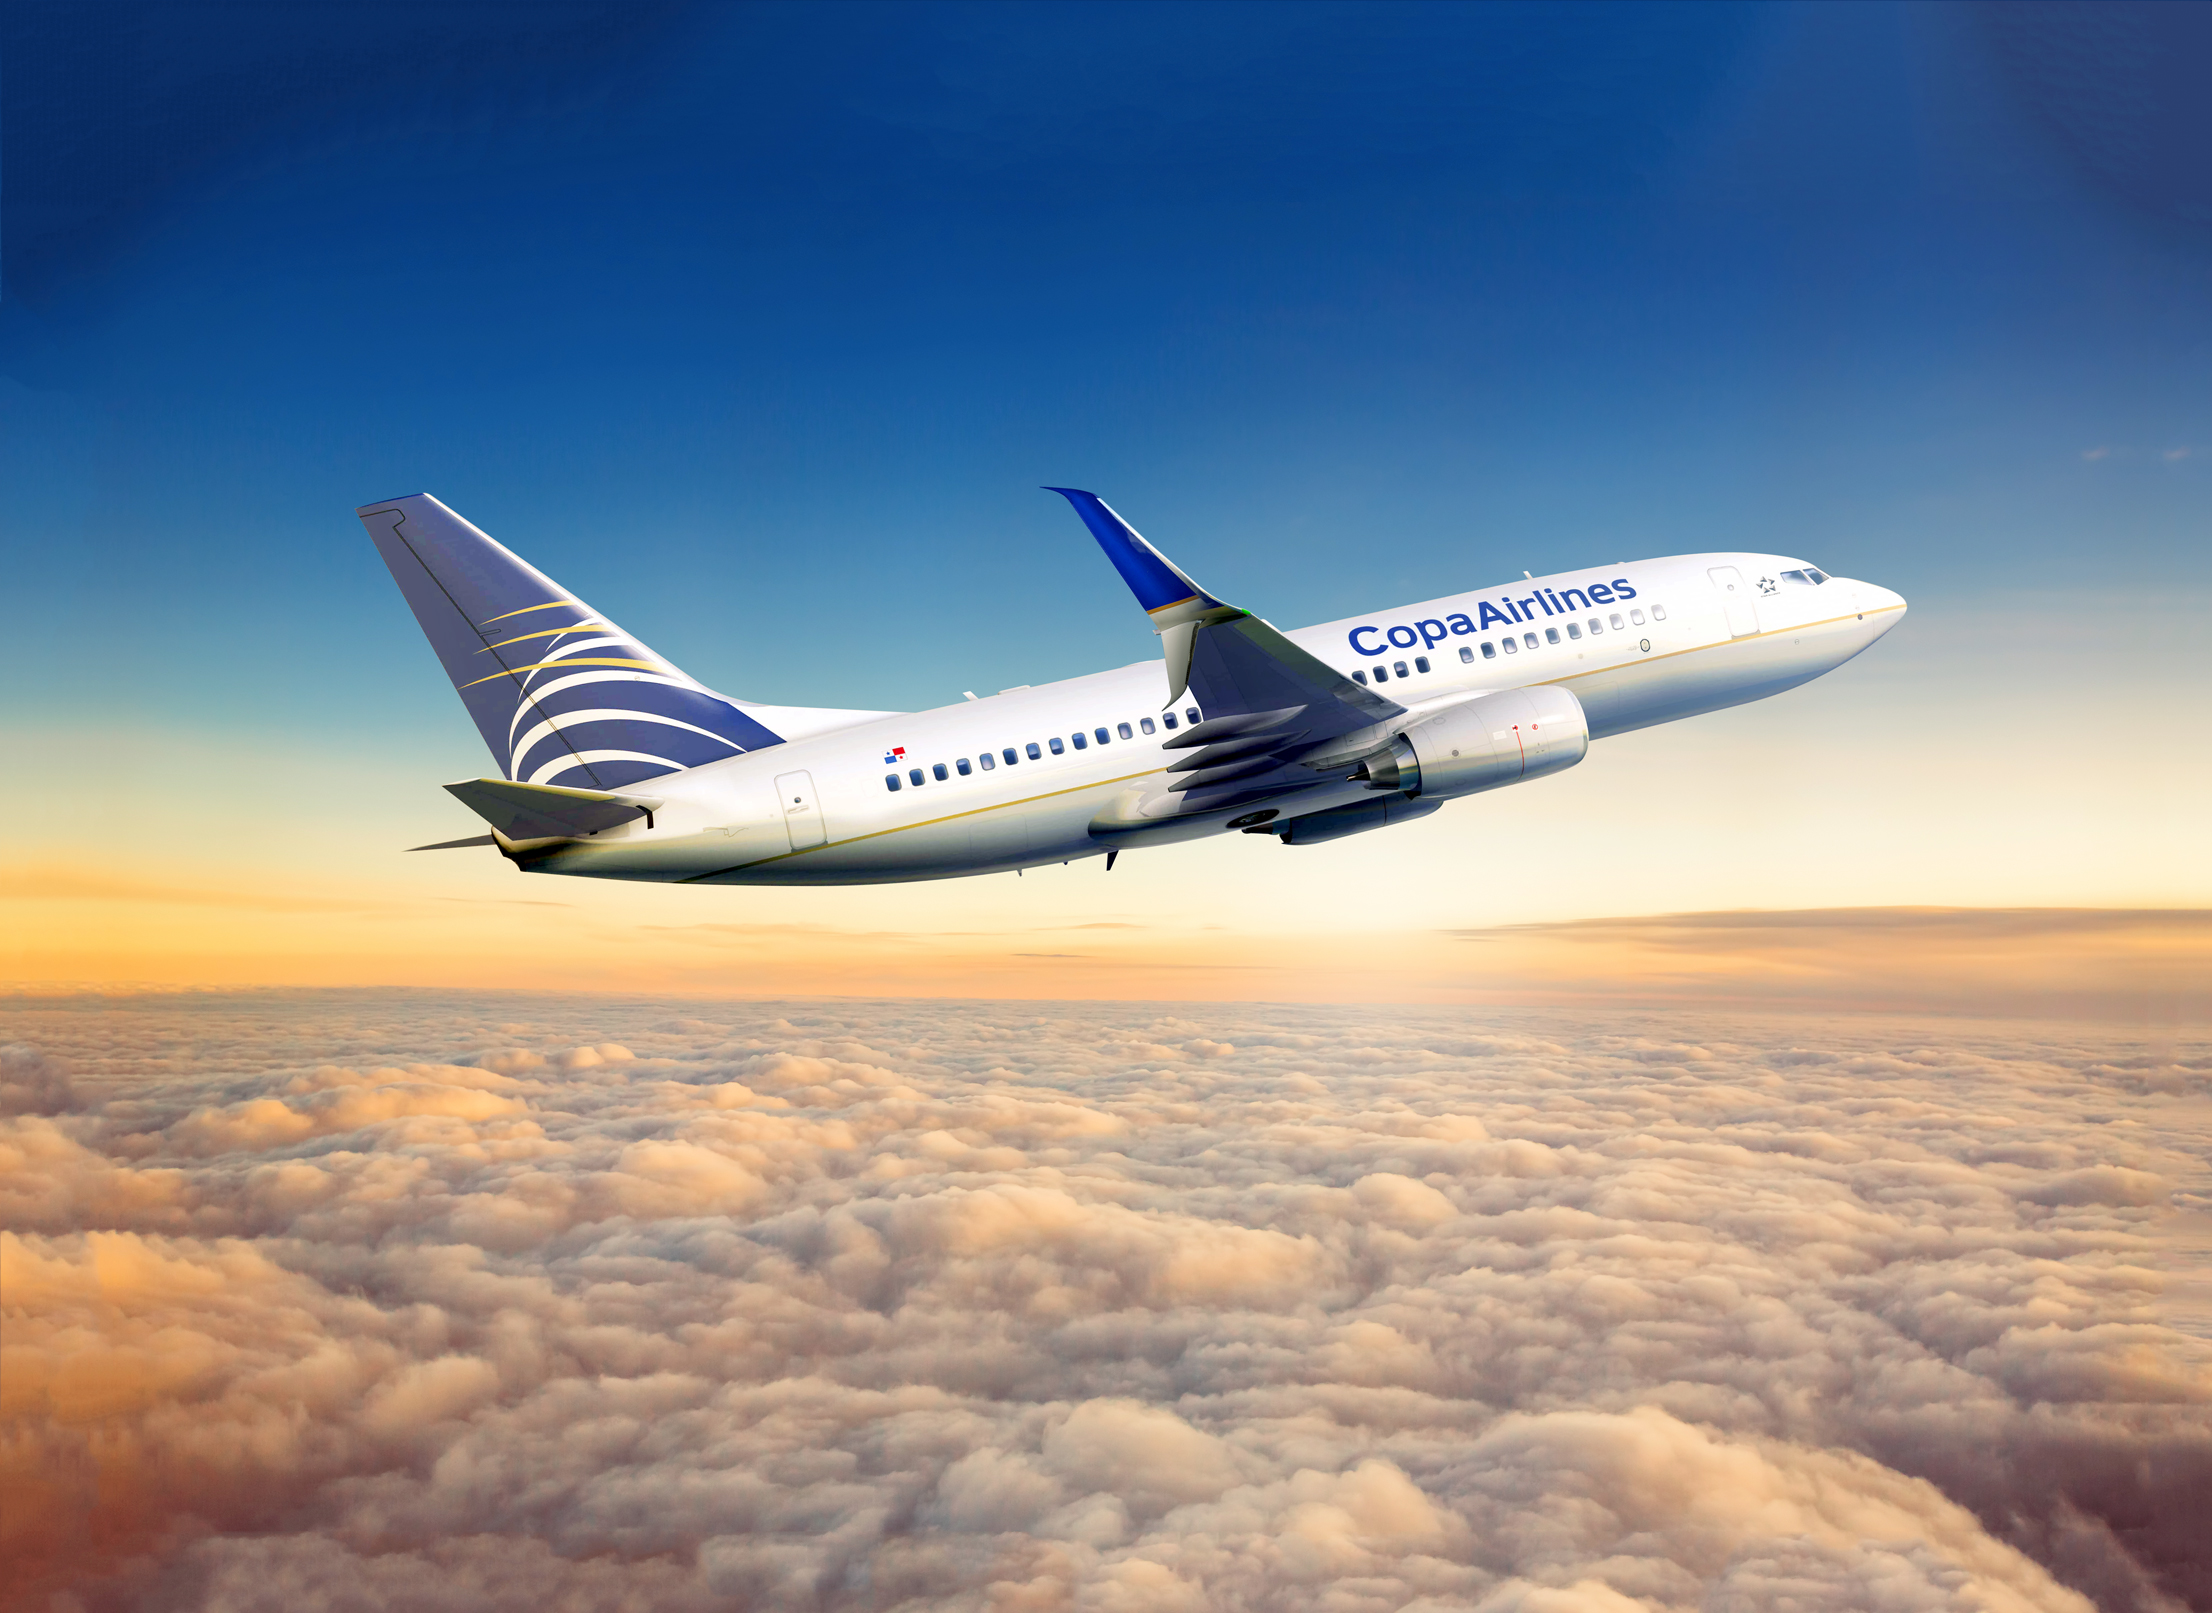 A Copa Airlines aircraft is midflight above the clouds.